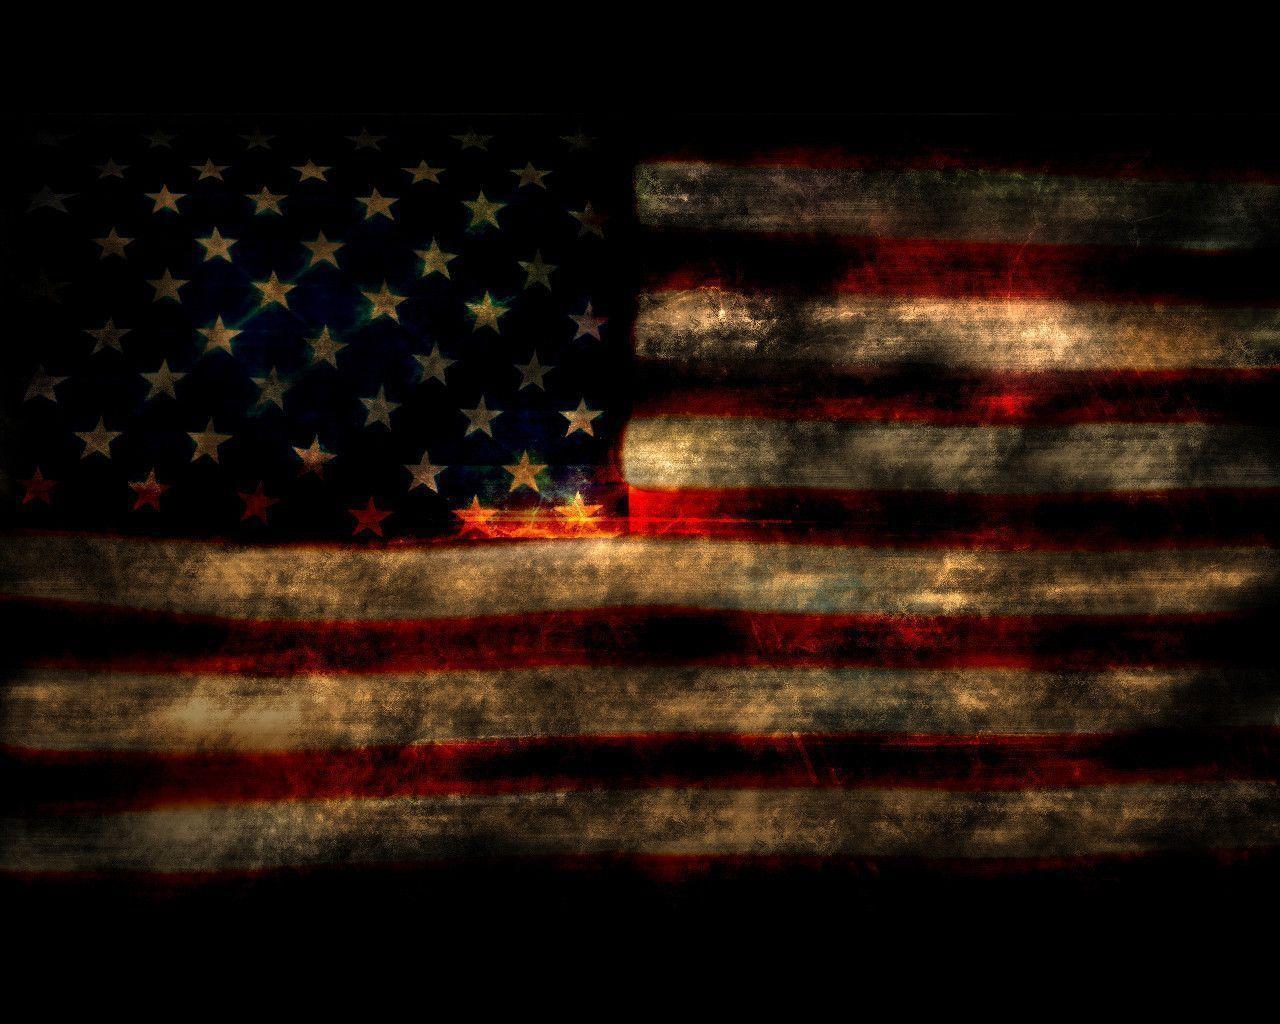 65389 American Flag Black Background Images Stock Photos  Vectors   Shutterstock